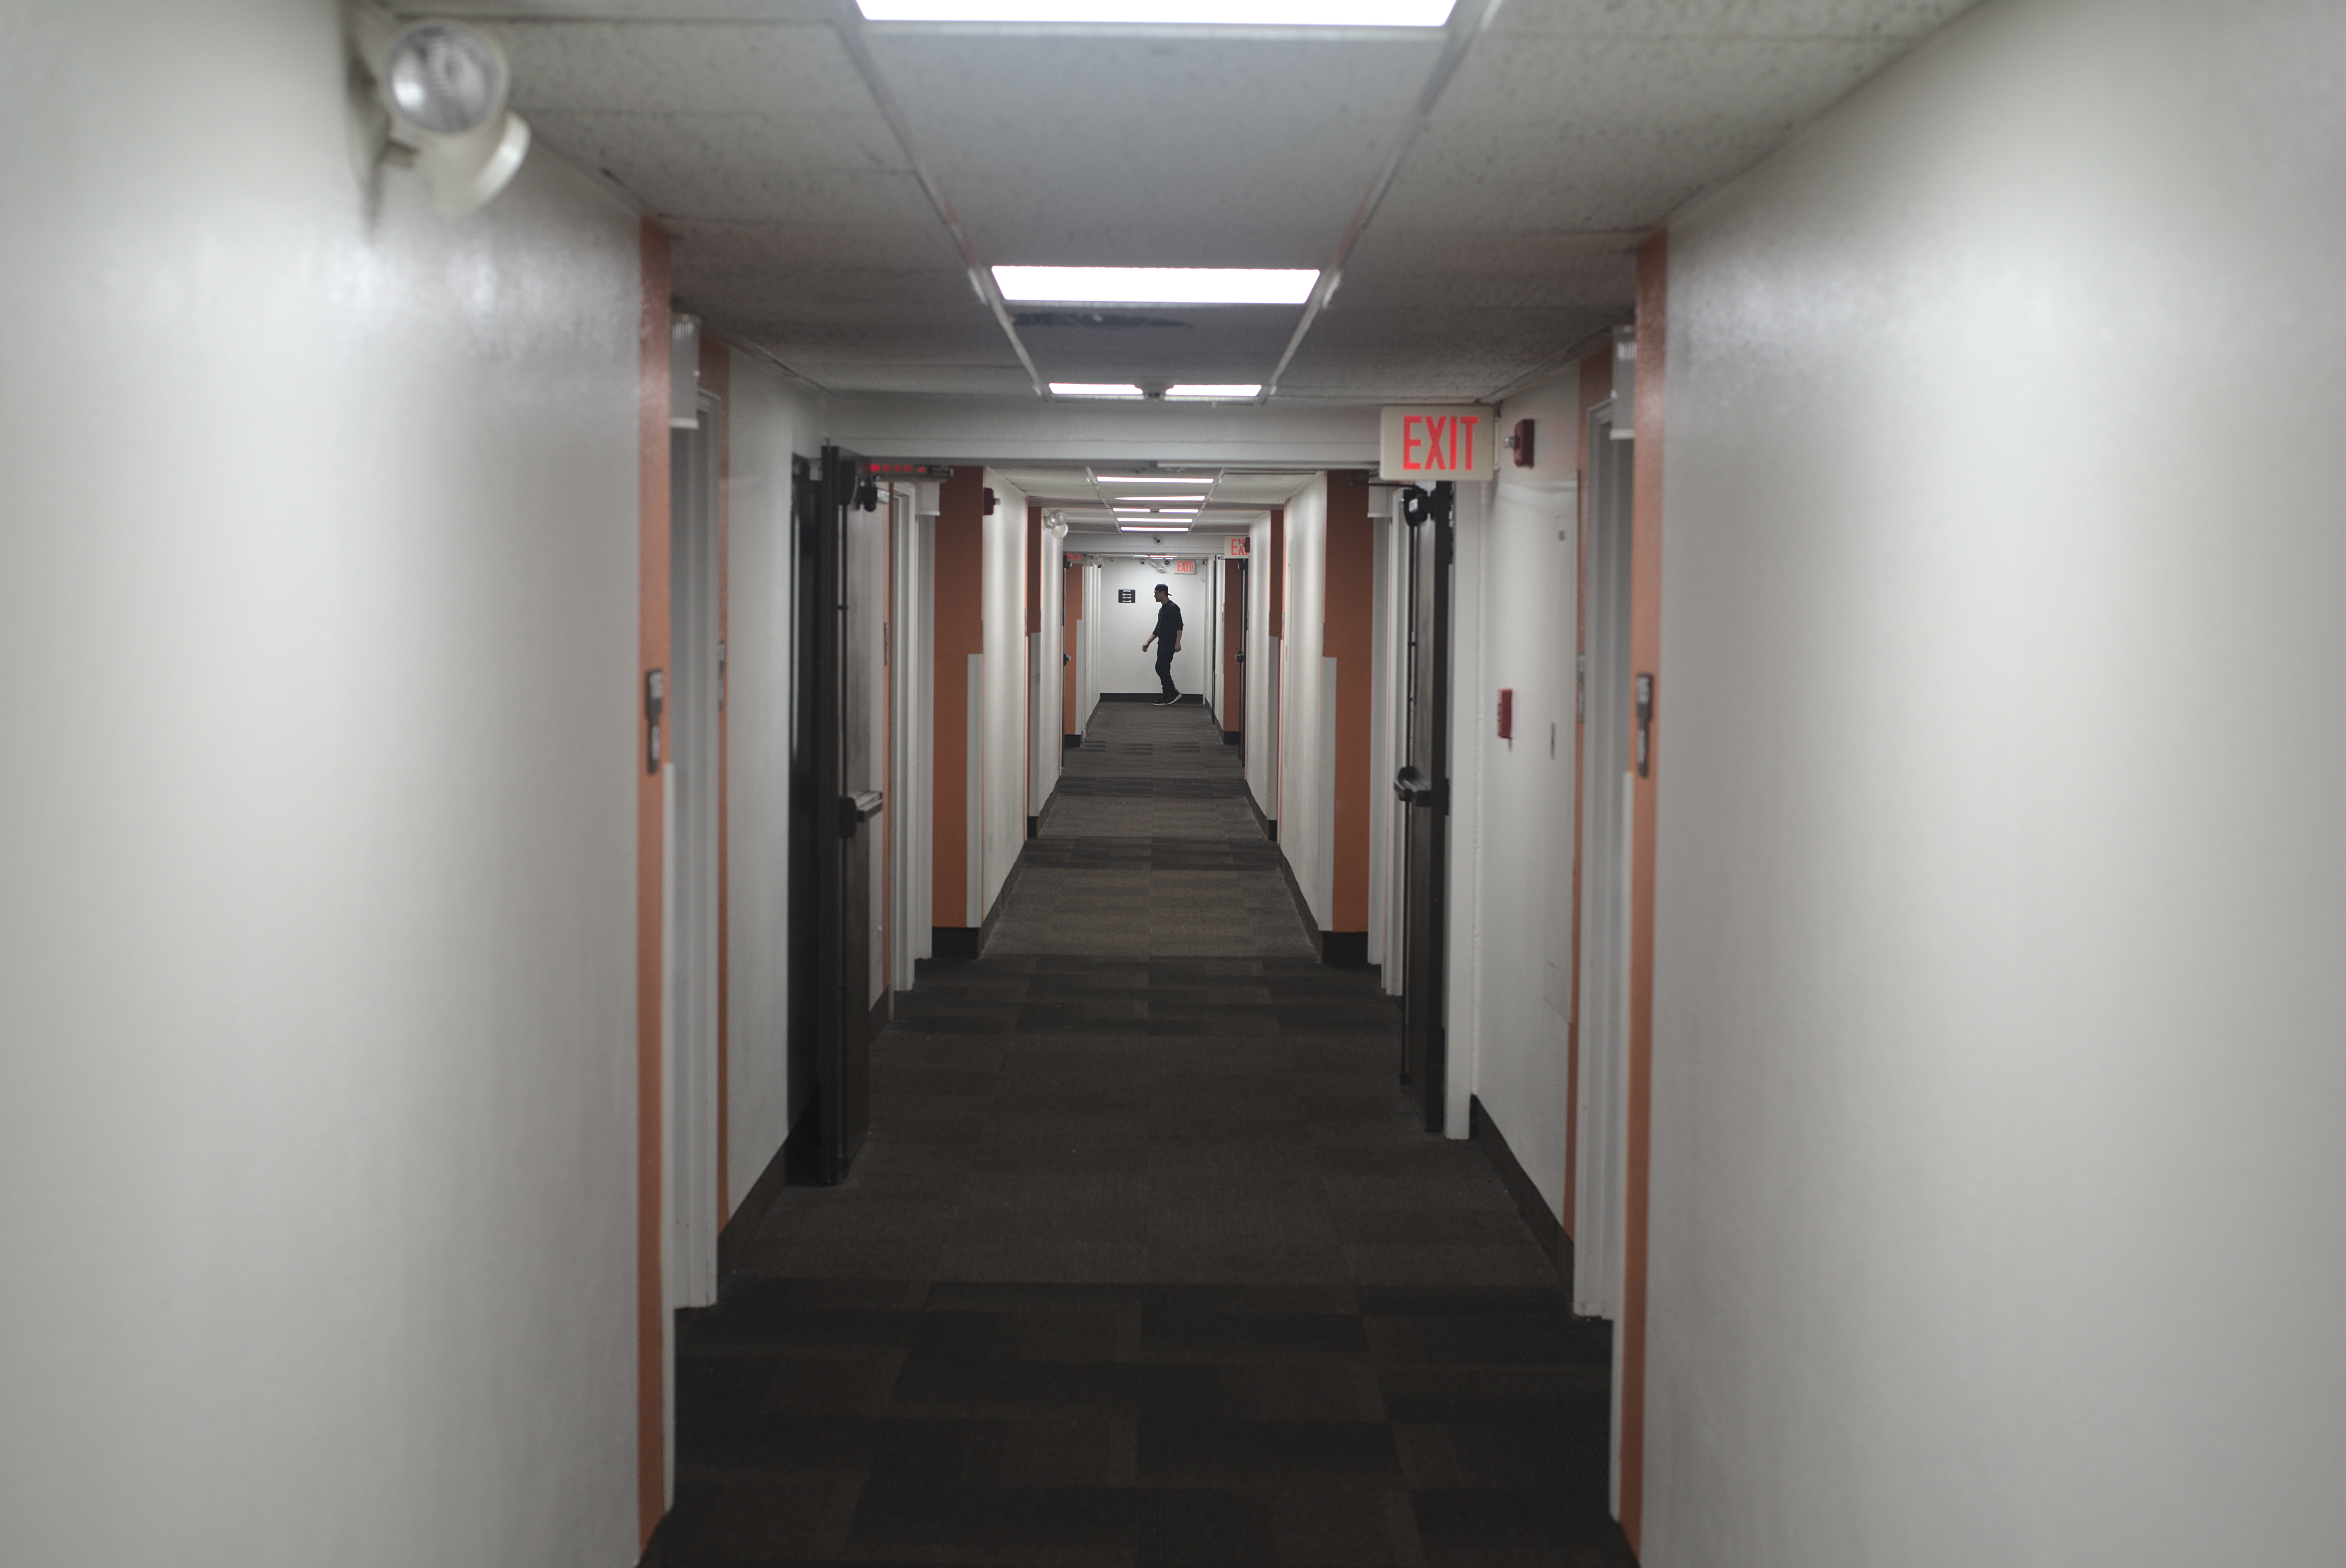 A hallway at the Newport Motel 6, which was converted this winter into a temporary shelter.